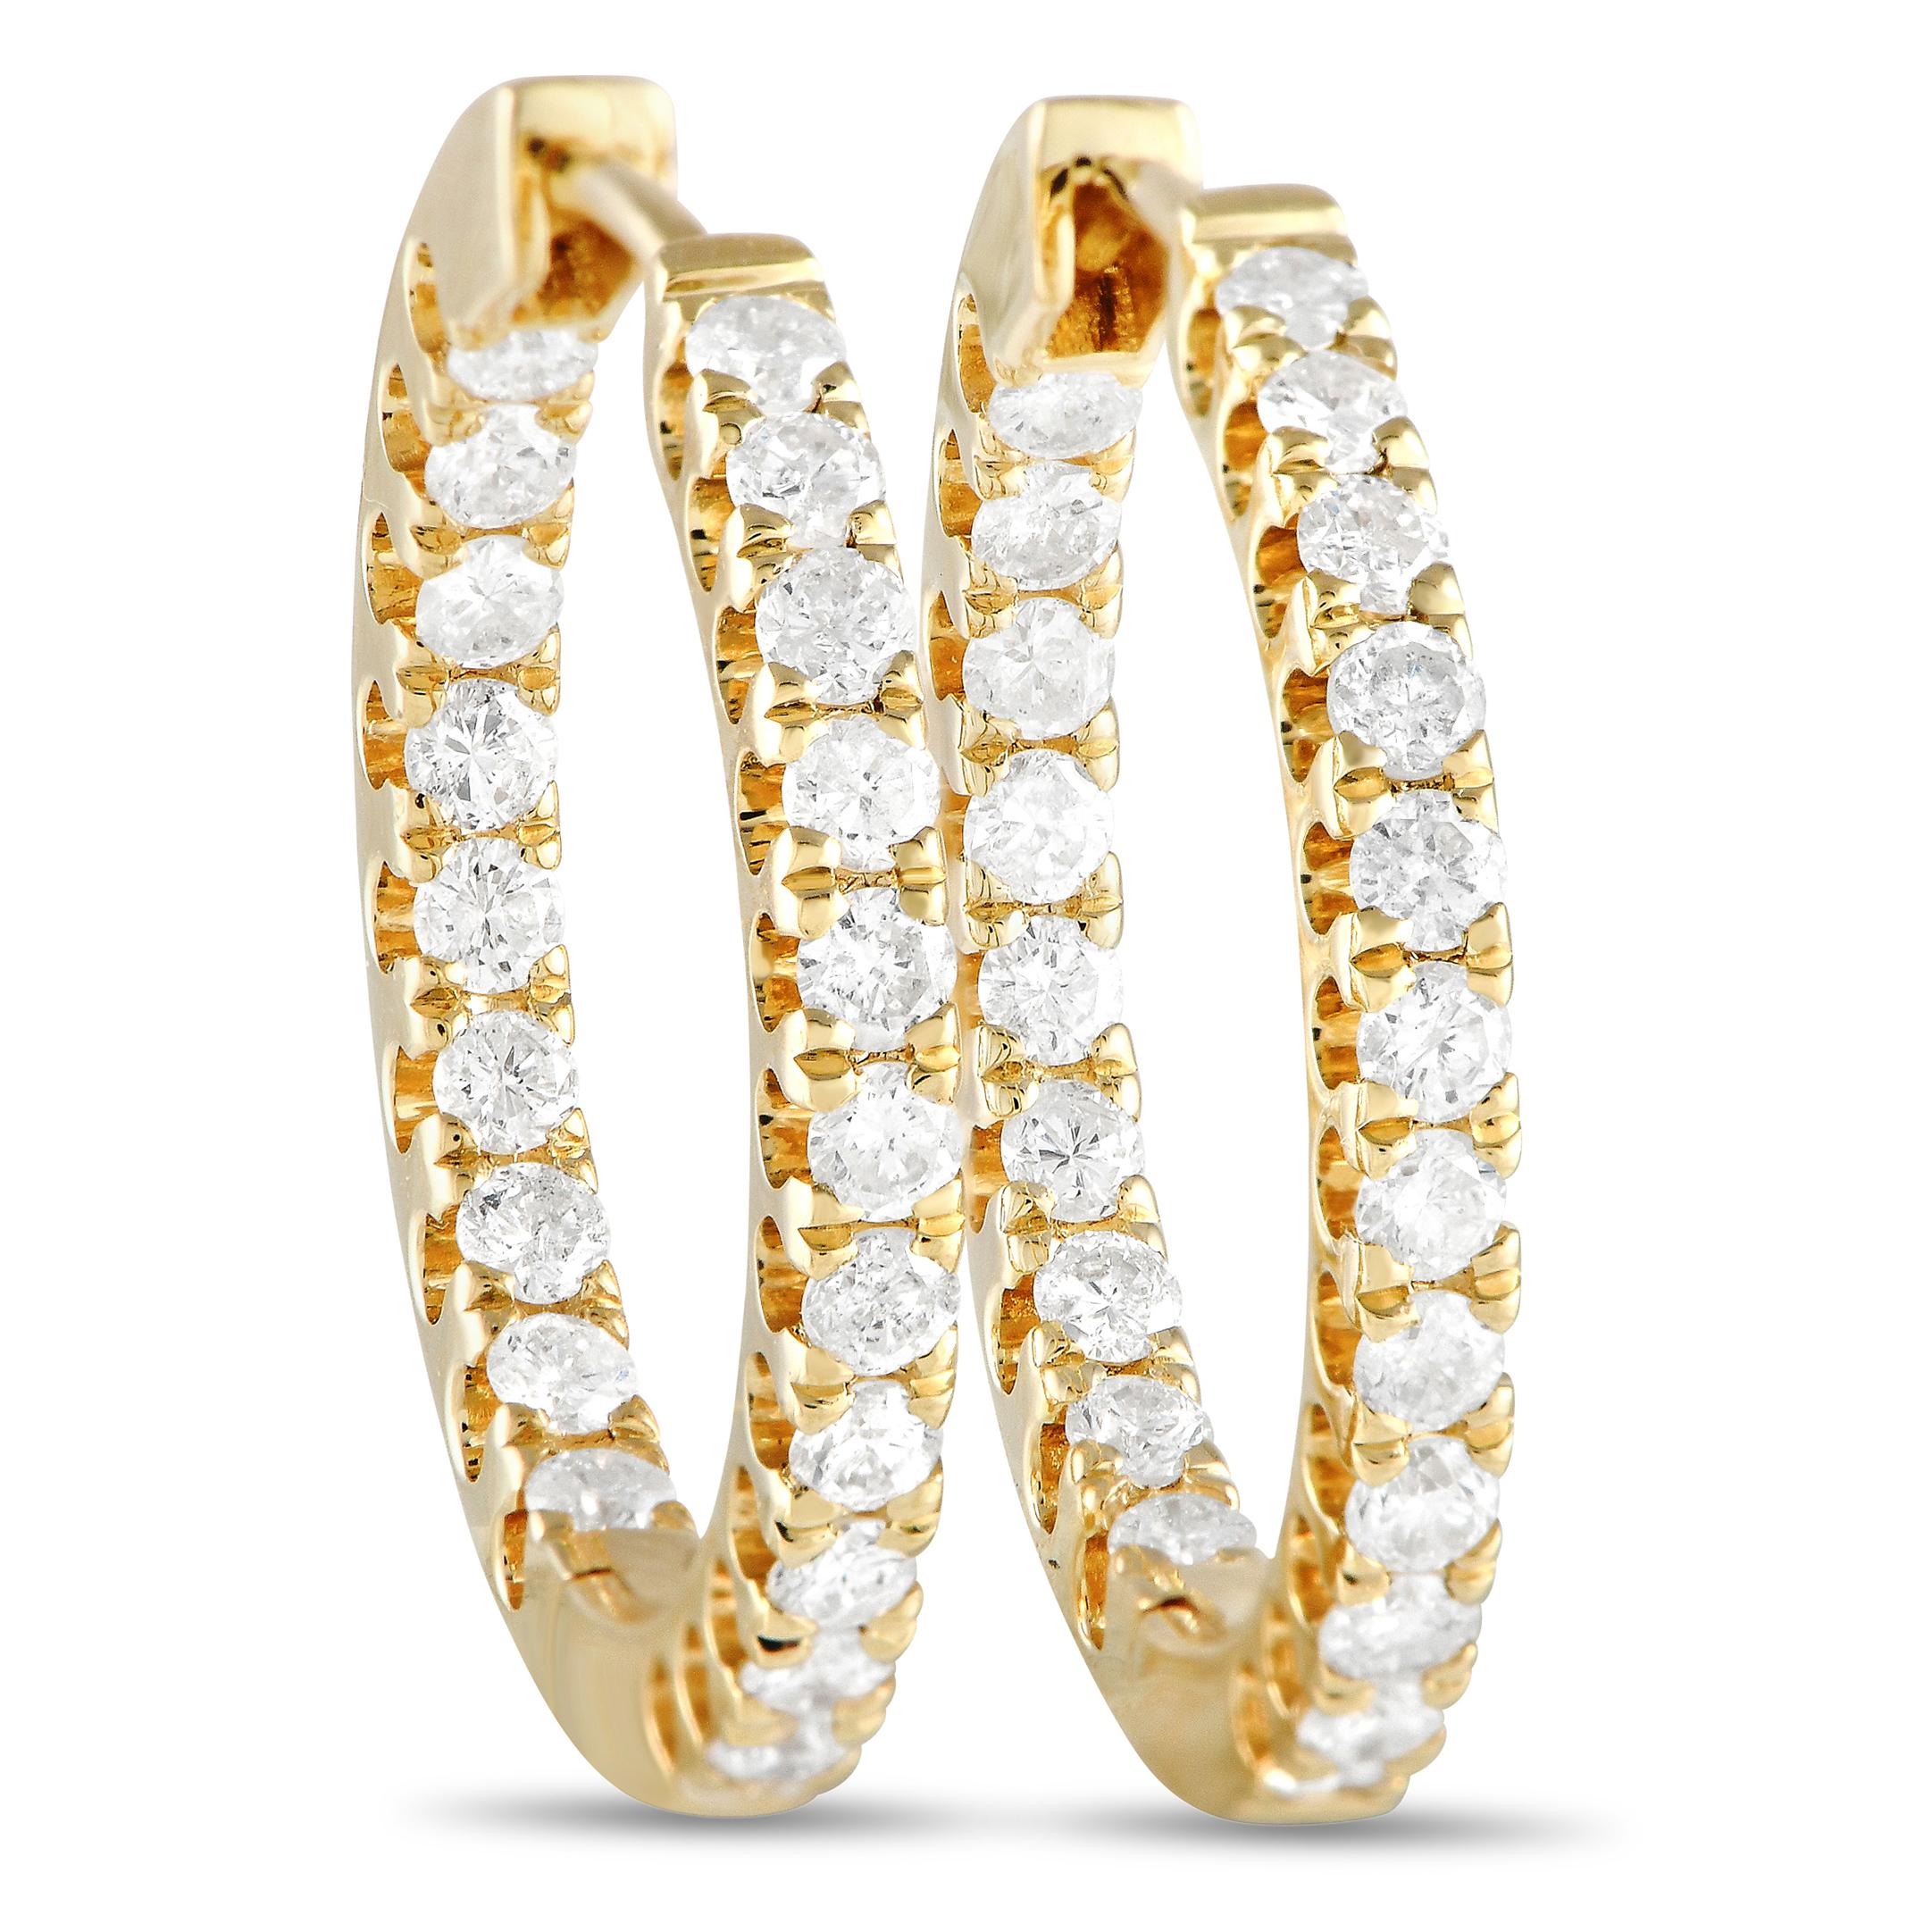 Lb Exclusive 14k Yellow Gold 1.0 Carat Diamond Inside-Out Hoop Earrings In New Condition For Sale In Southampton, PA